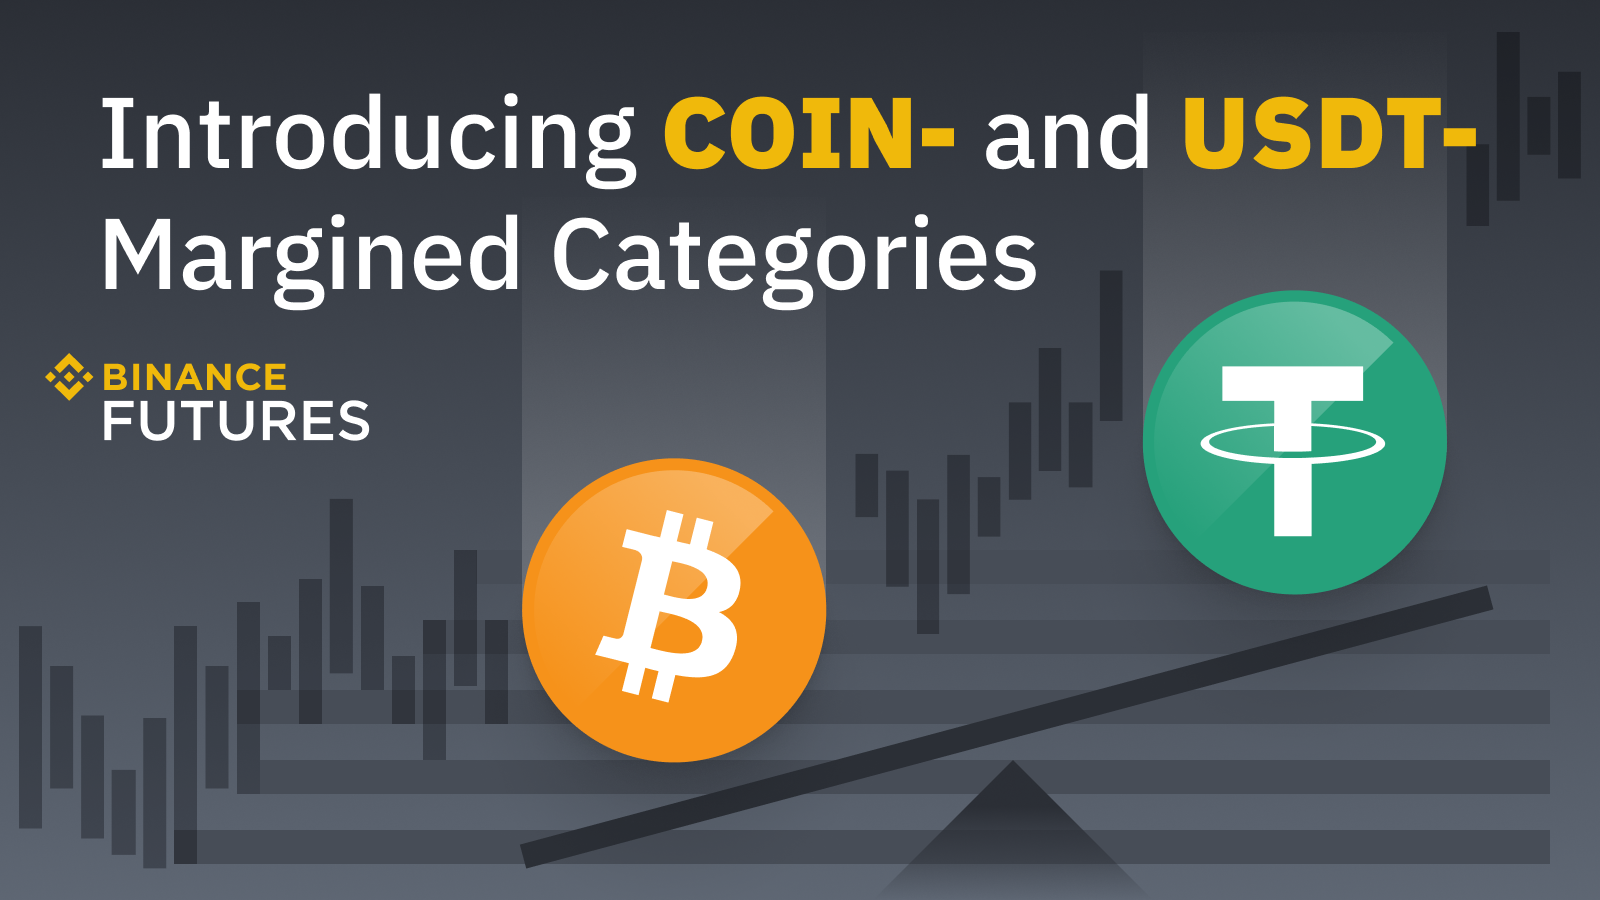 binance-introduces-coin-and-usdt-margined-categories-for-futures-emphasis-on-cryptocurrency-for-settlement-reflects-industrys-standing